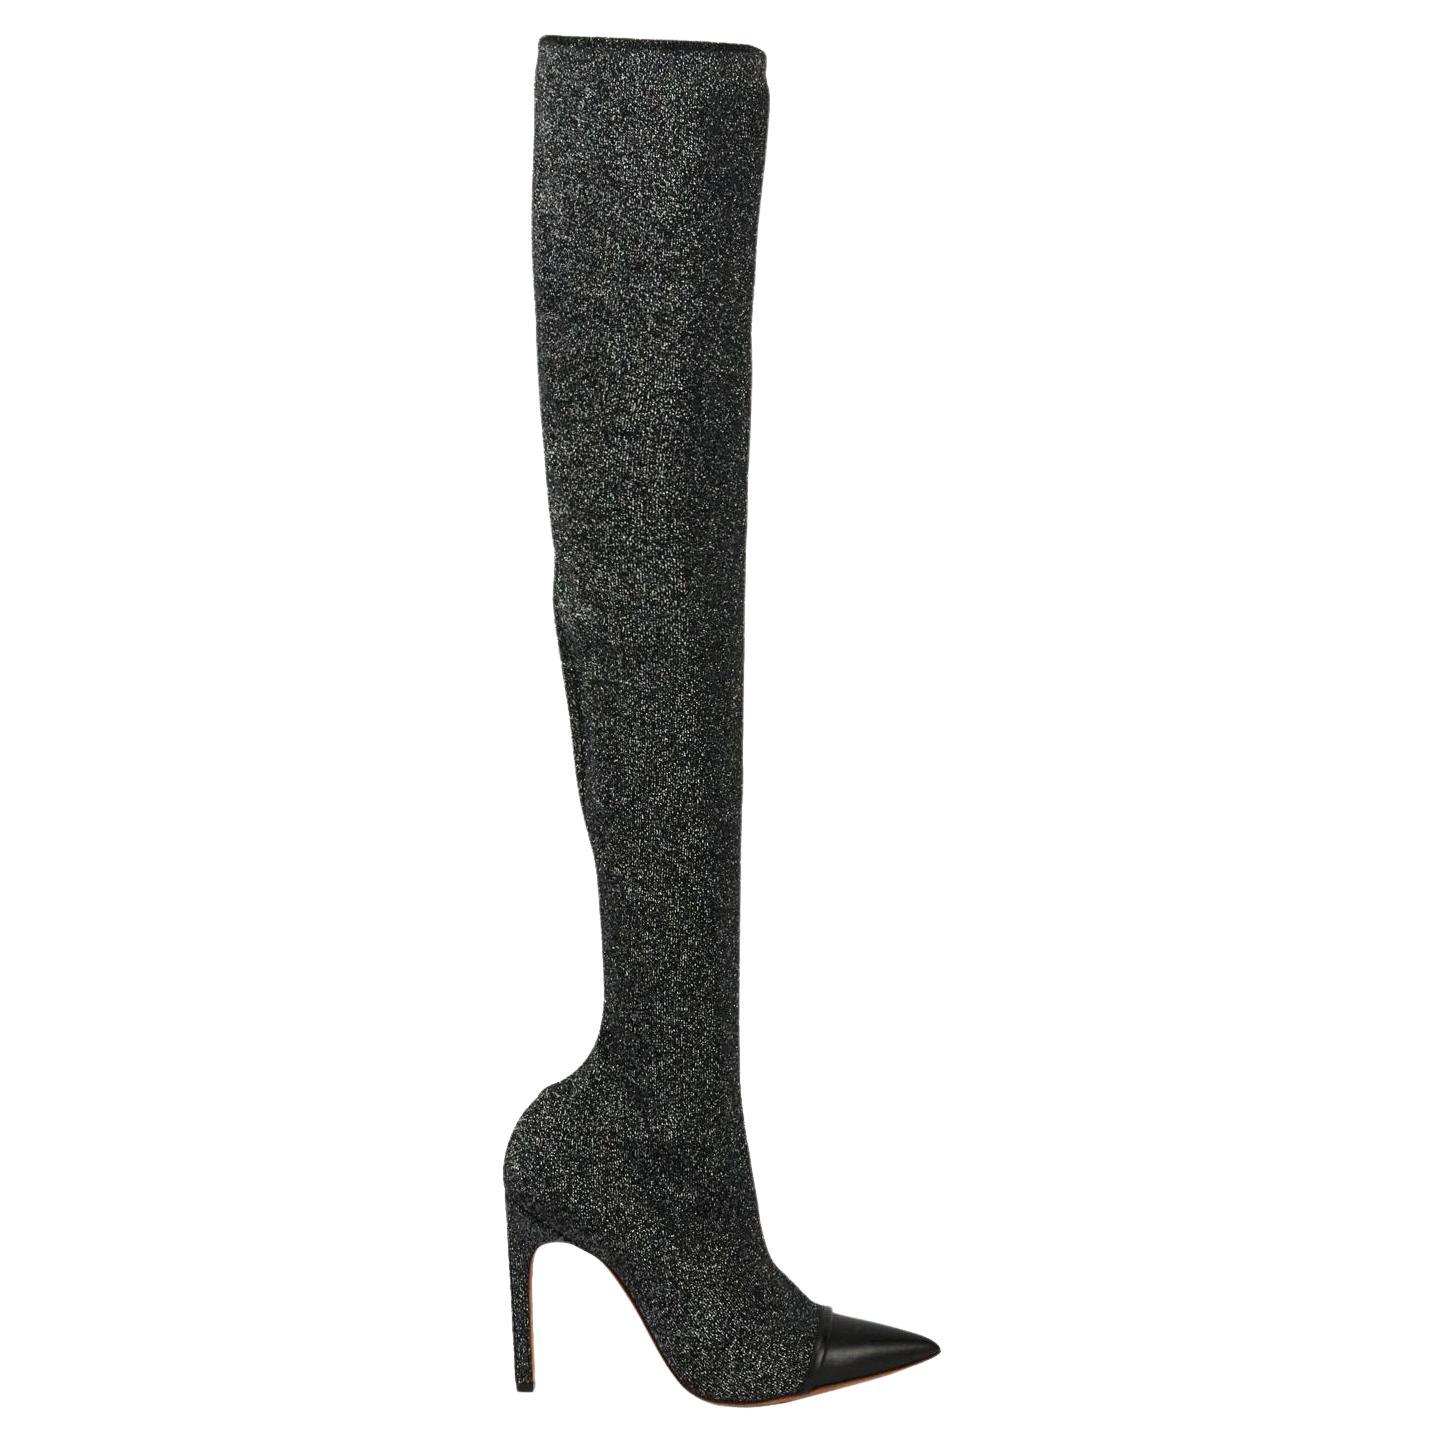 Givenchy Glitter Stretch Knit Over The Knee Boots EU 39 UK 6 US 9